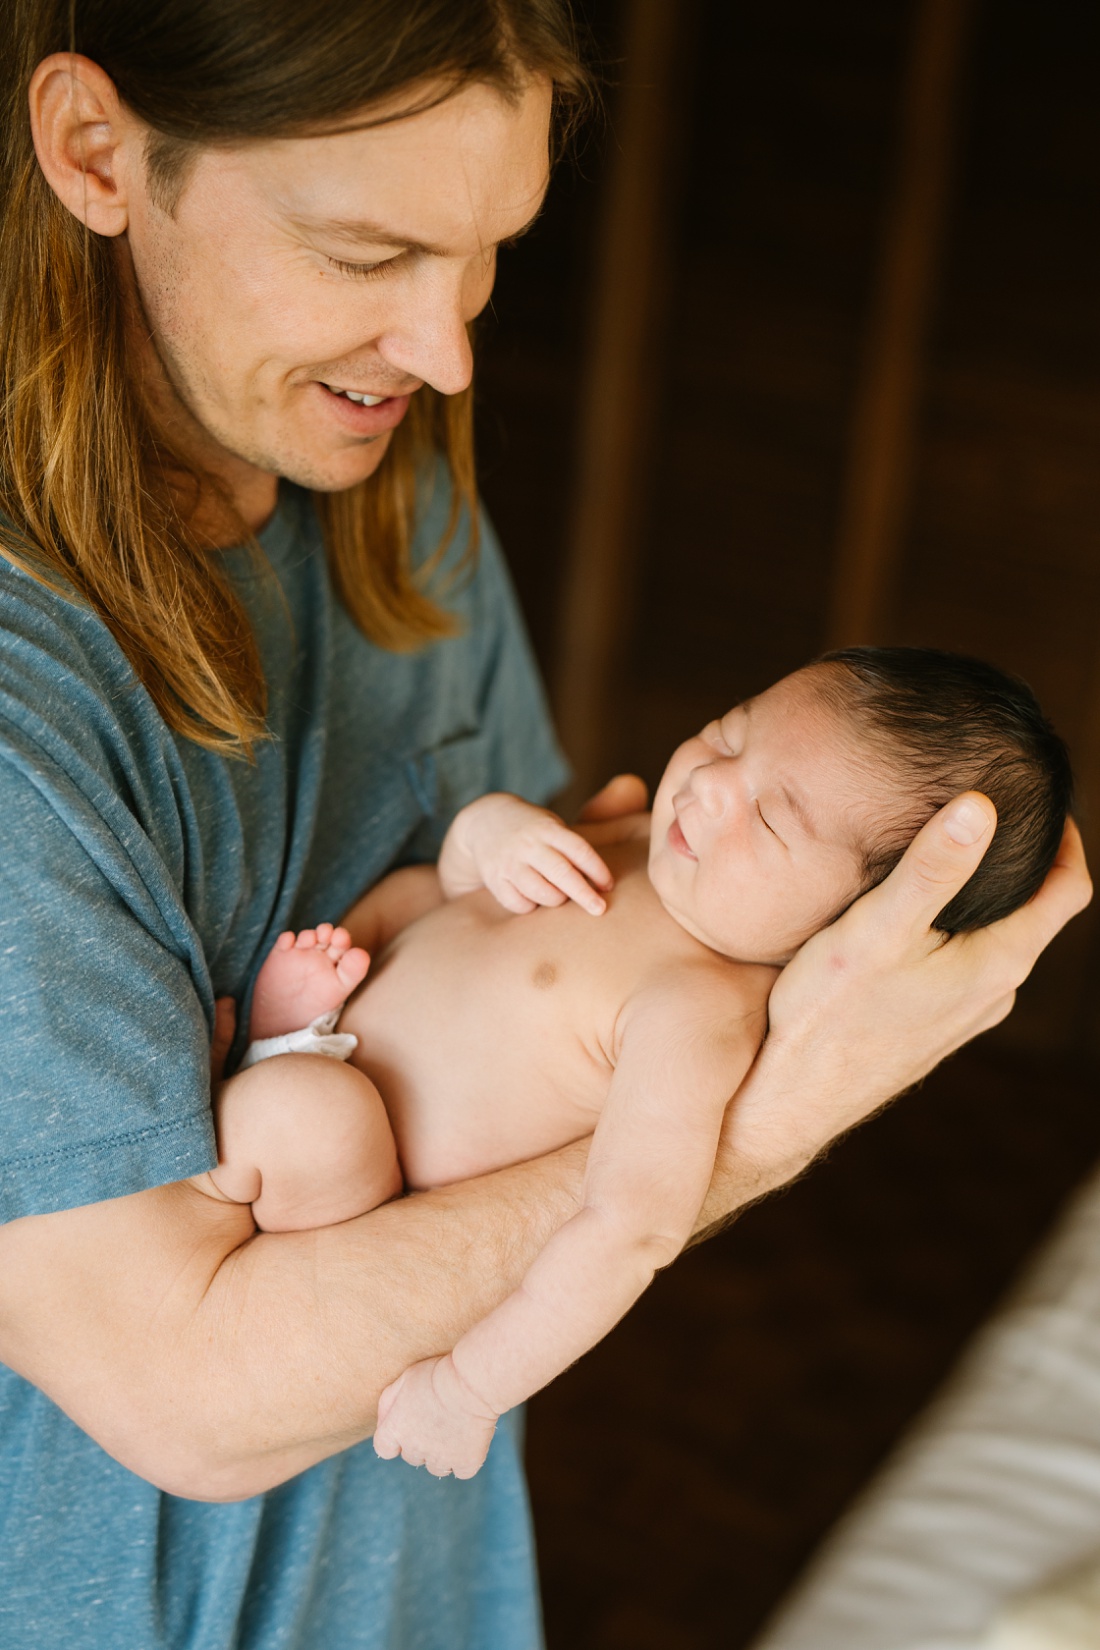 newborn baby smiles as dad holds him during a newborn photography session at home